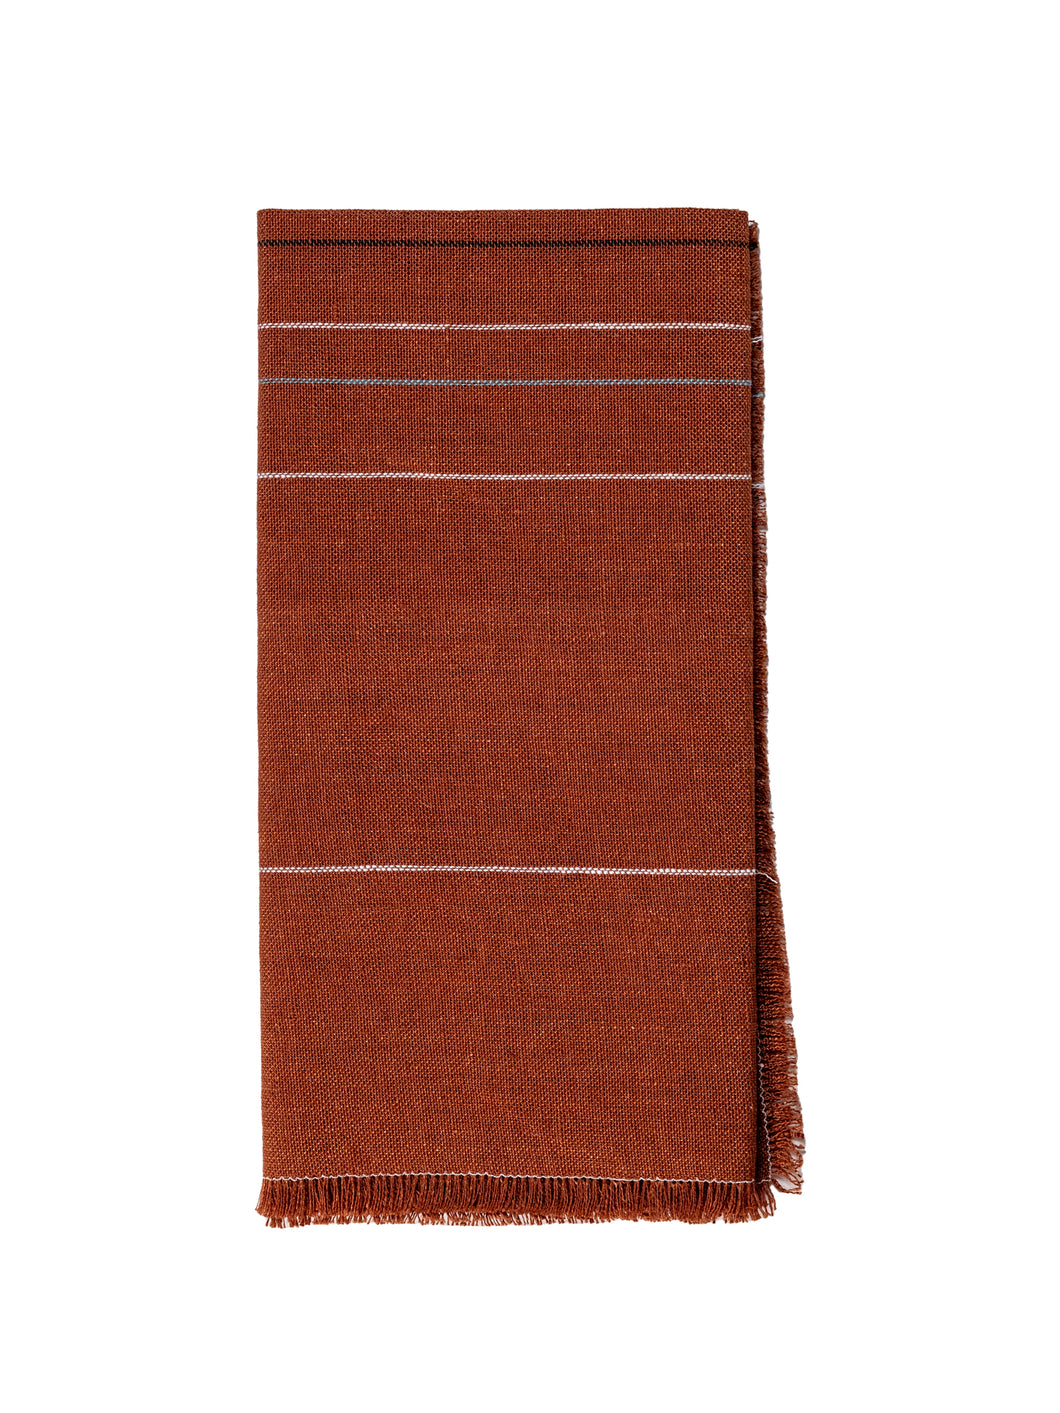 Chroma Fringed Napkin in Earth Brown